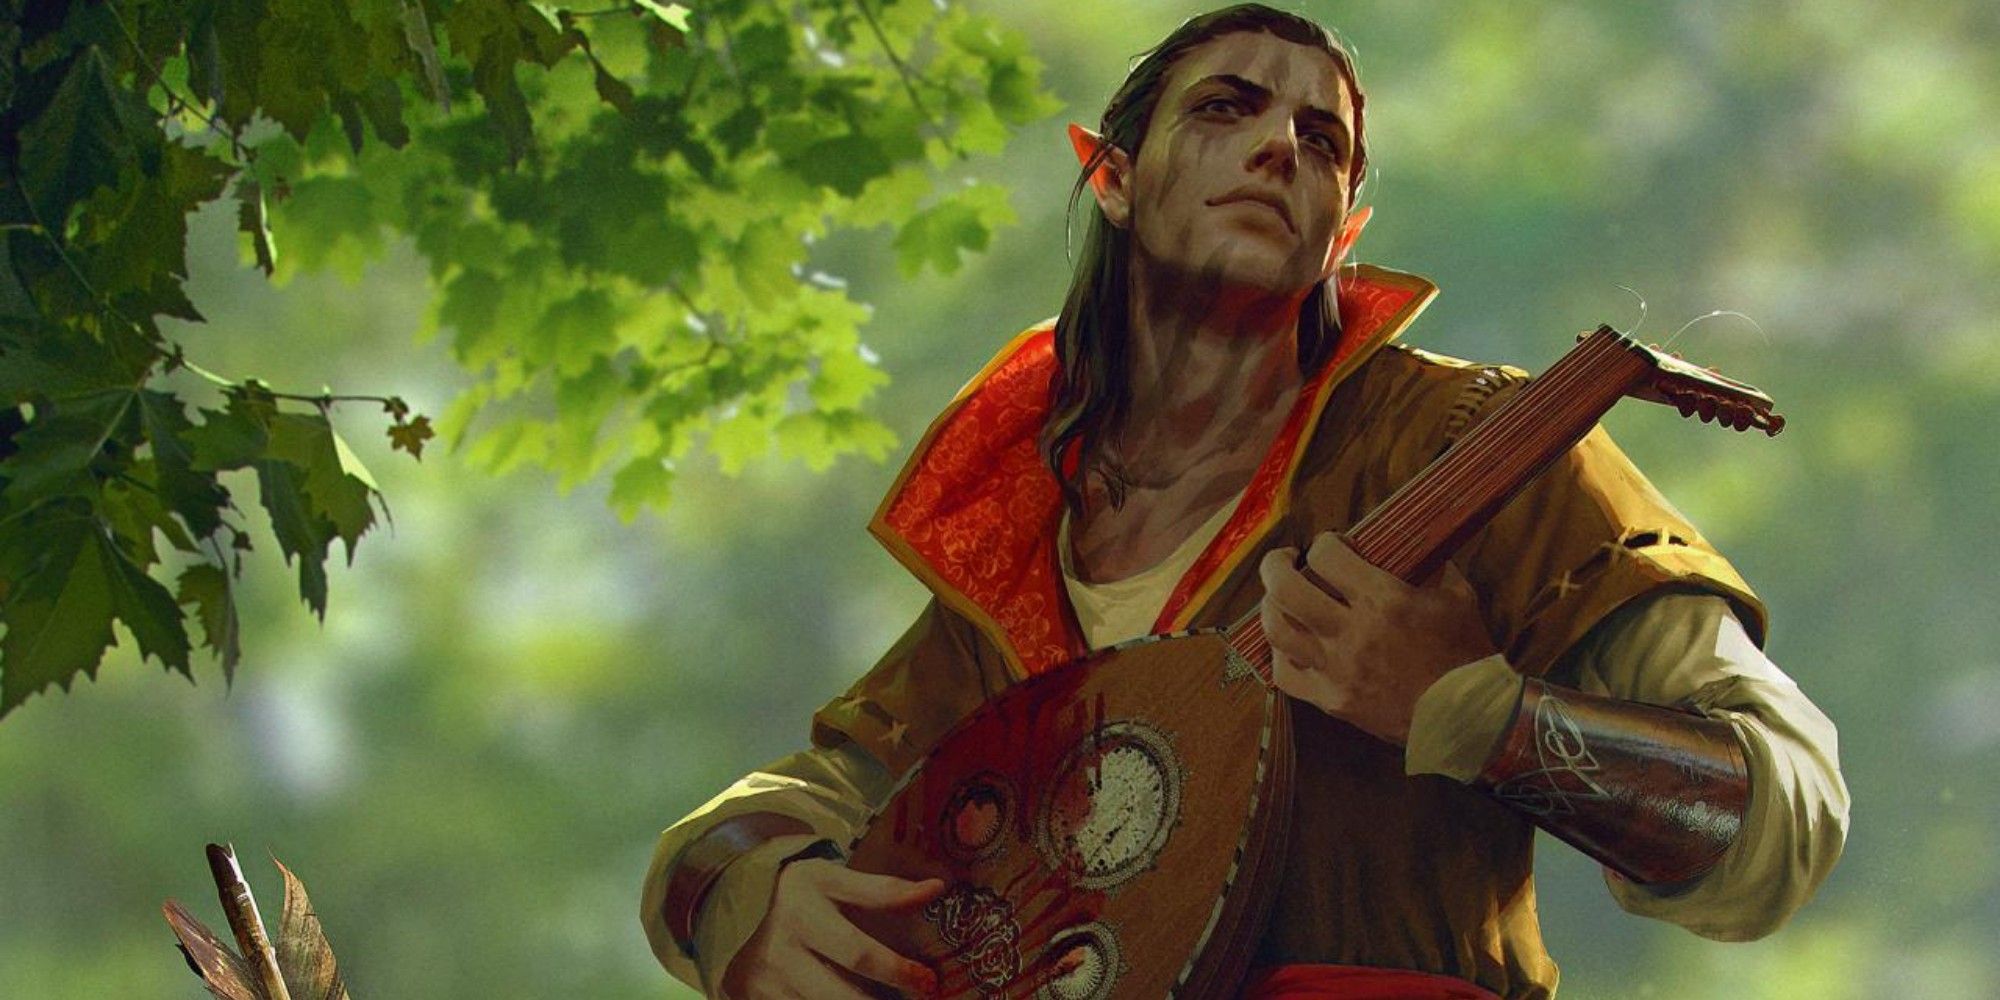 elf art from gwent